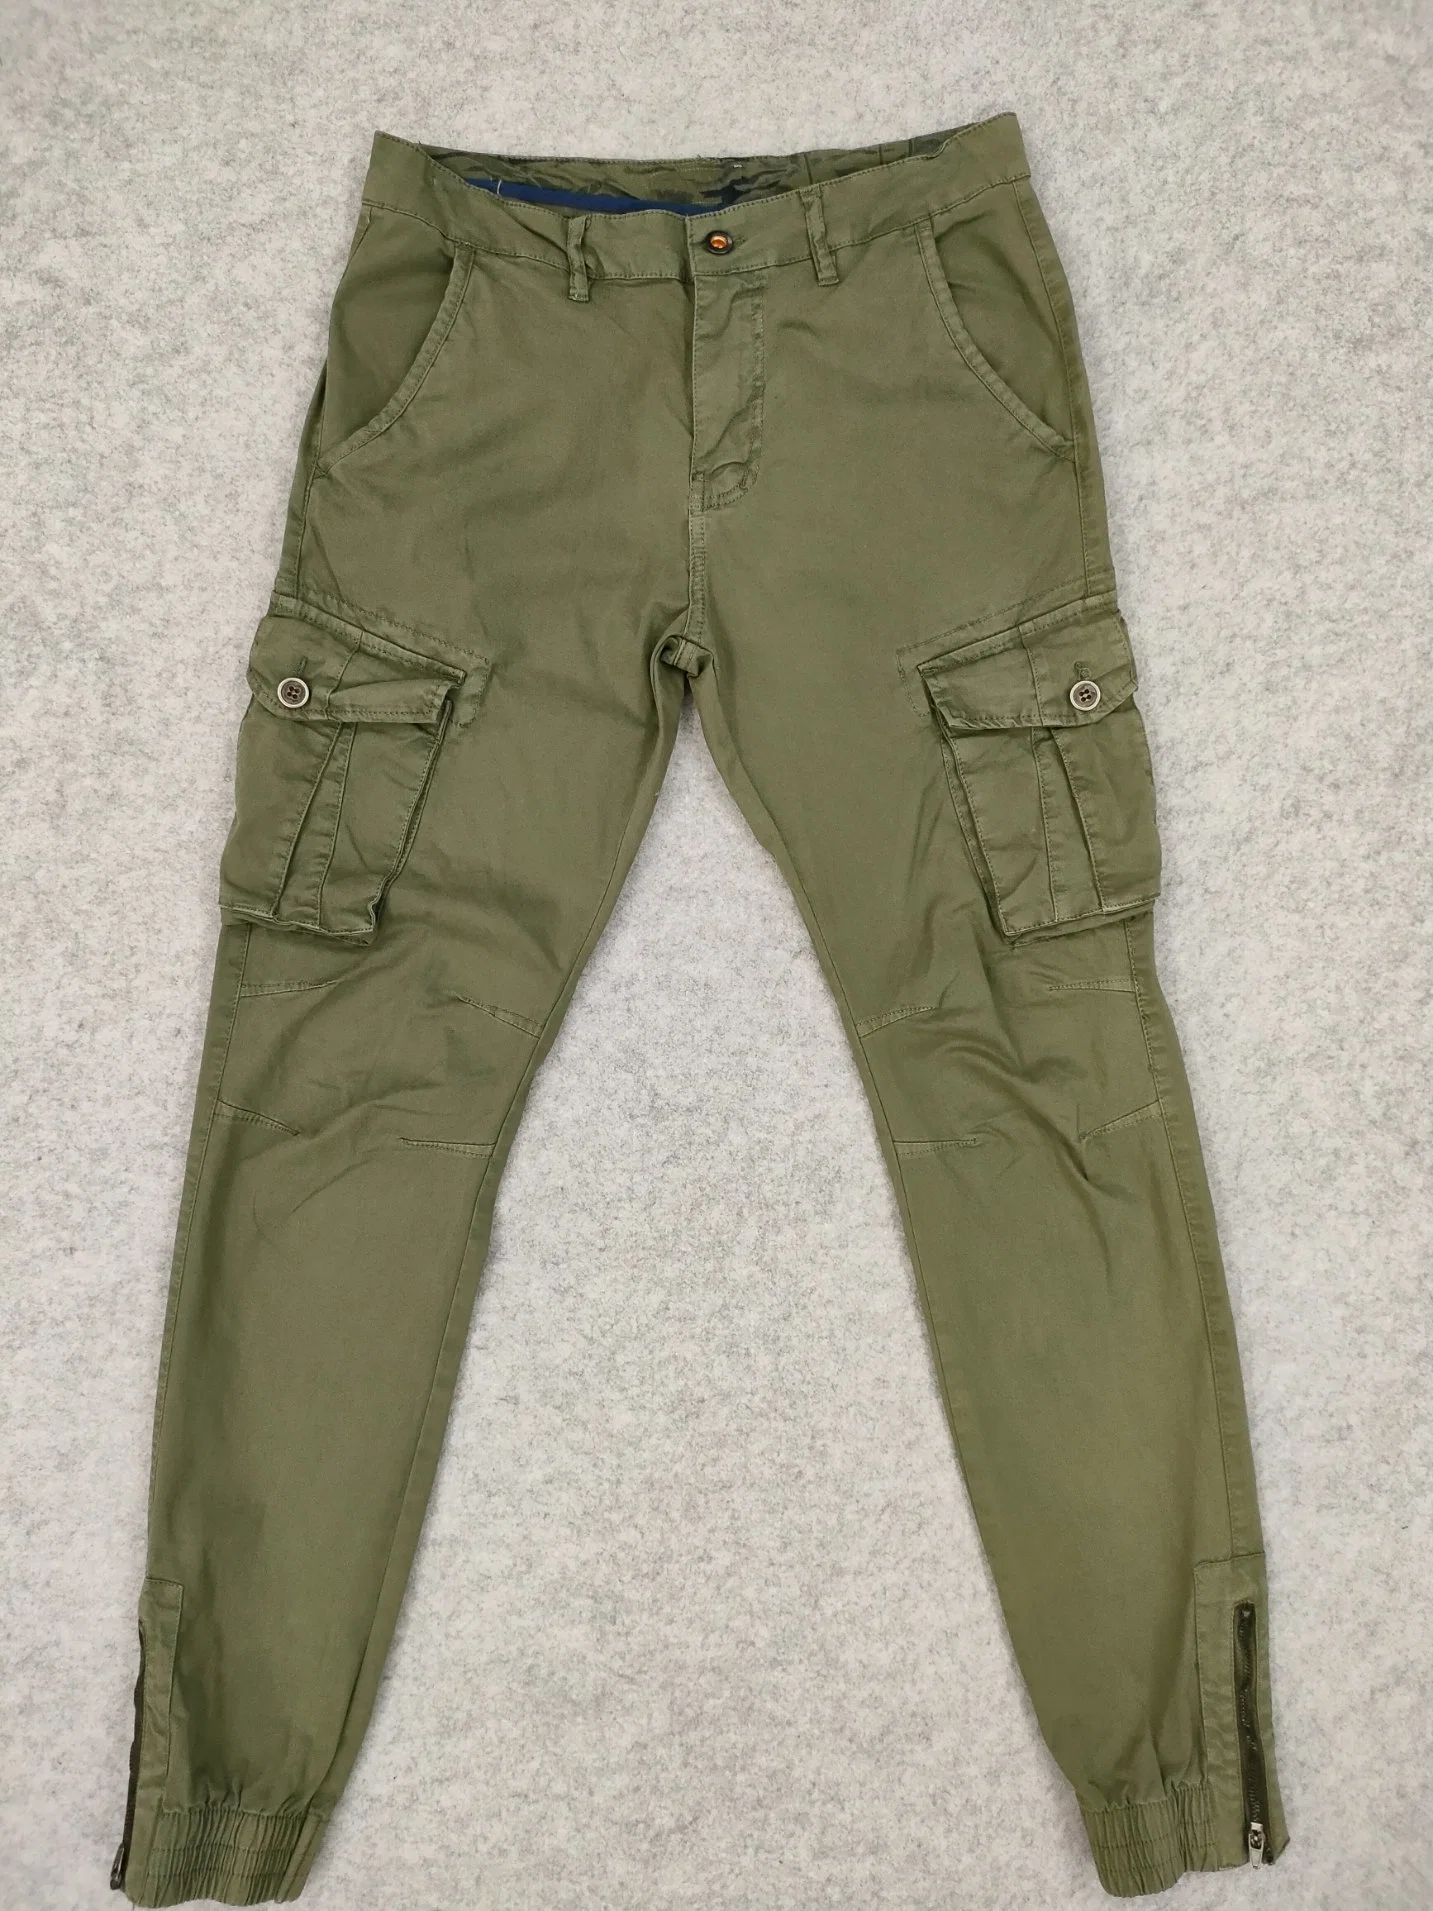 Thick Stretch Hiking Pants Outdoor Wear Climb Cargo Pants